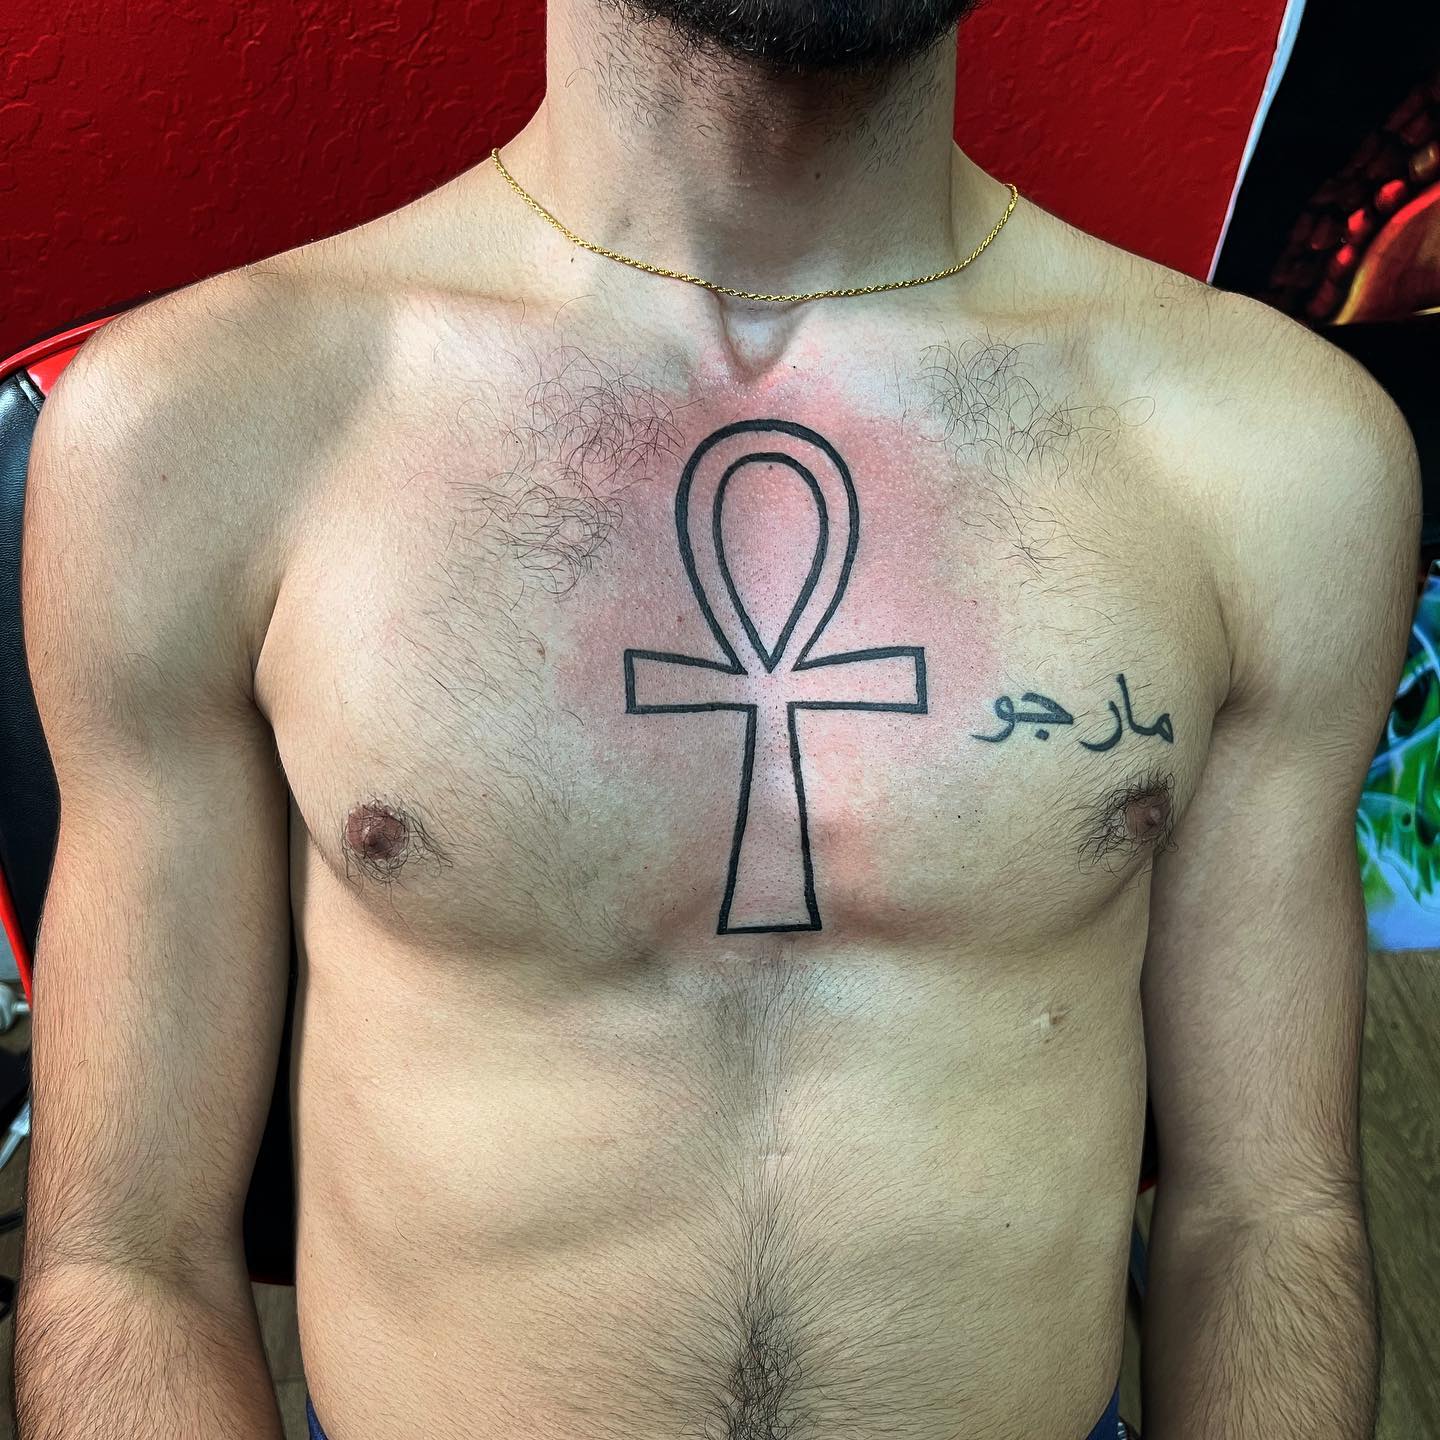 20 Powerful Ankh Tattoo Ideas  Analogy Behind the Ancient Symbol